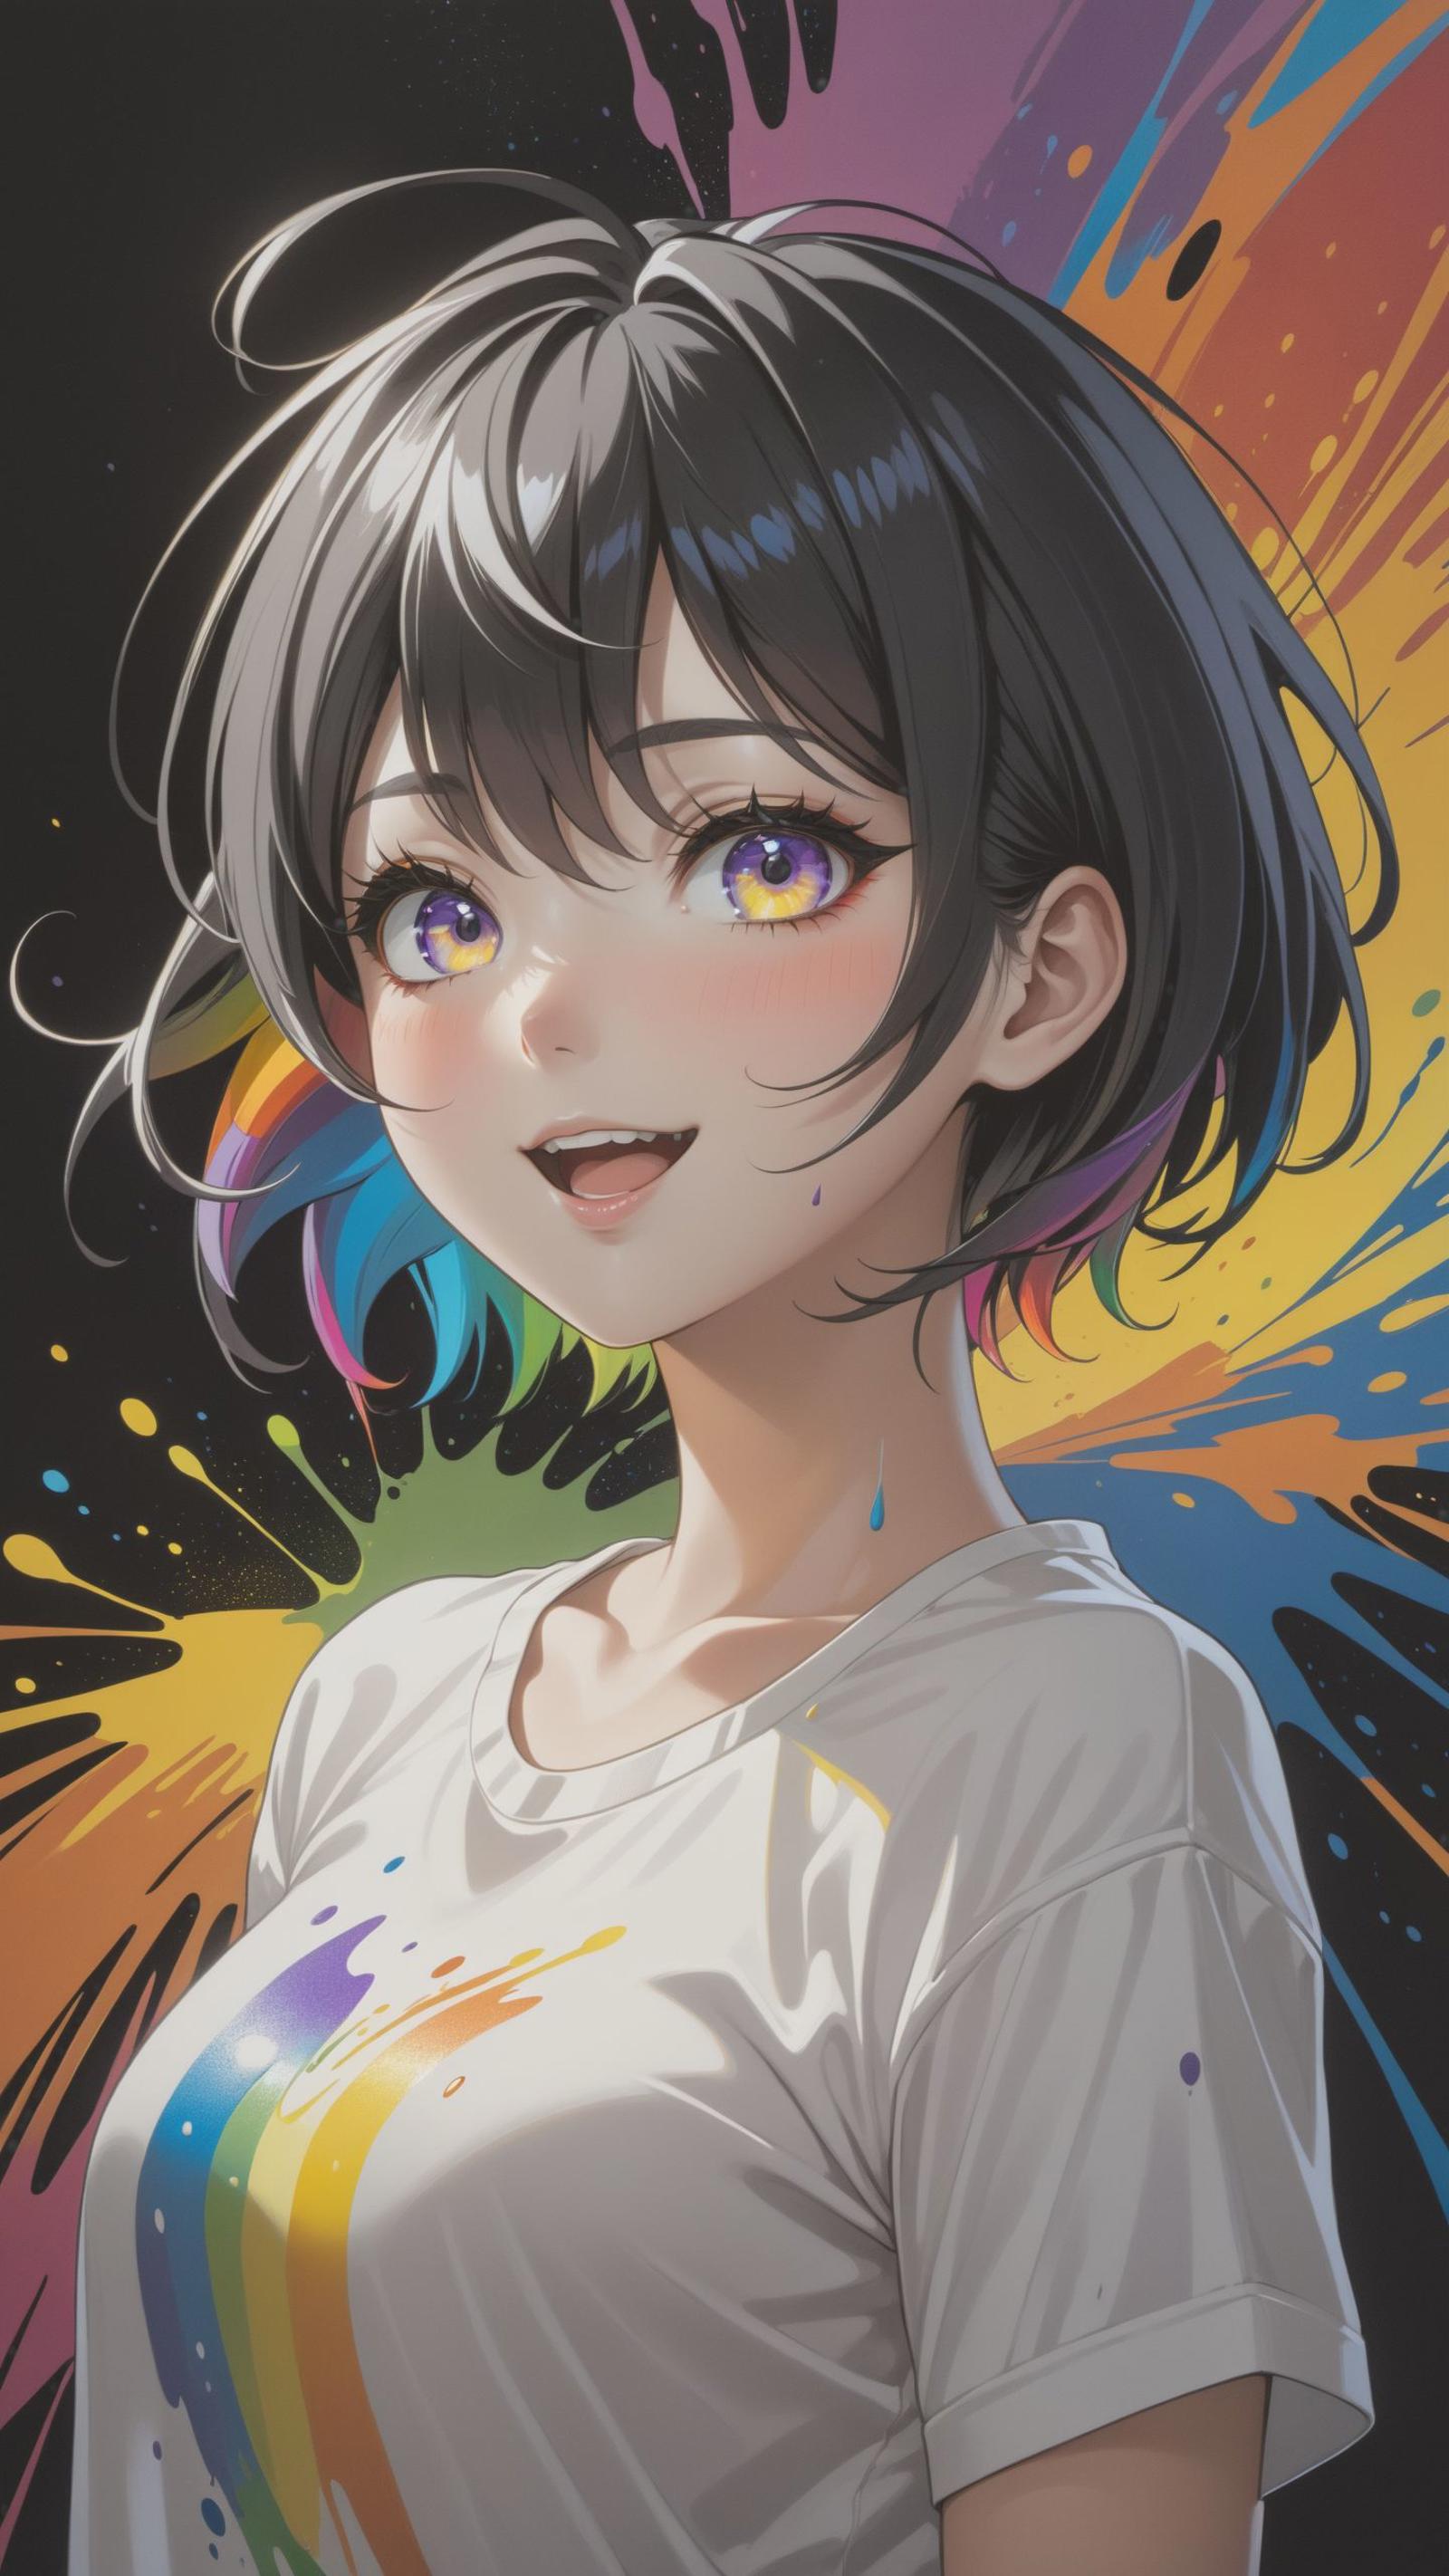 Anime character with purple eyes, multicolored hair, and white shirt.